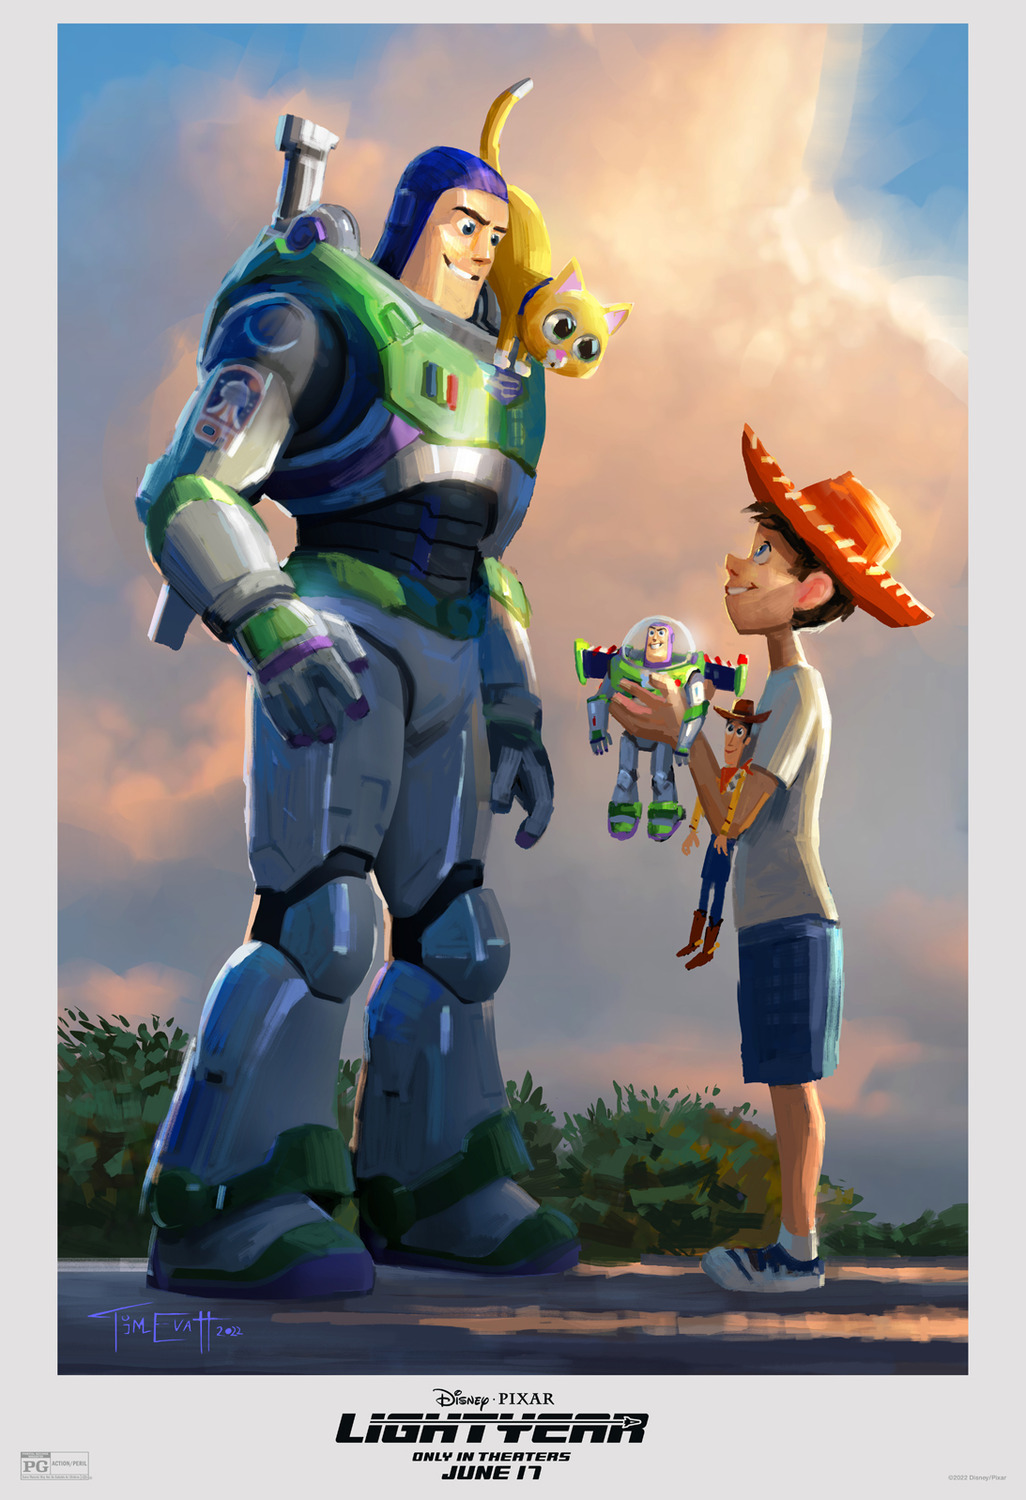 Extra Large Movie Poster Image for Lightyear (#13 of 14)